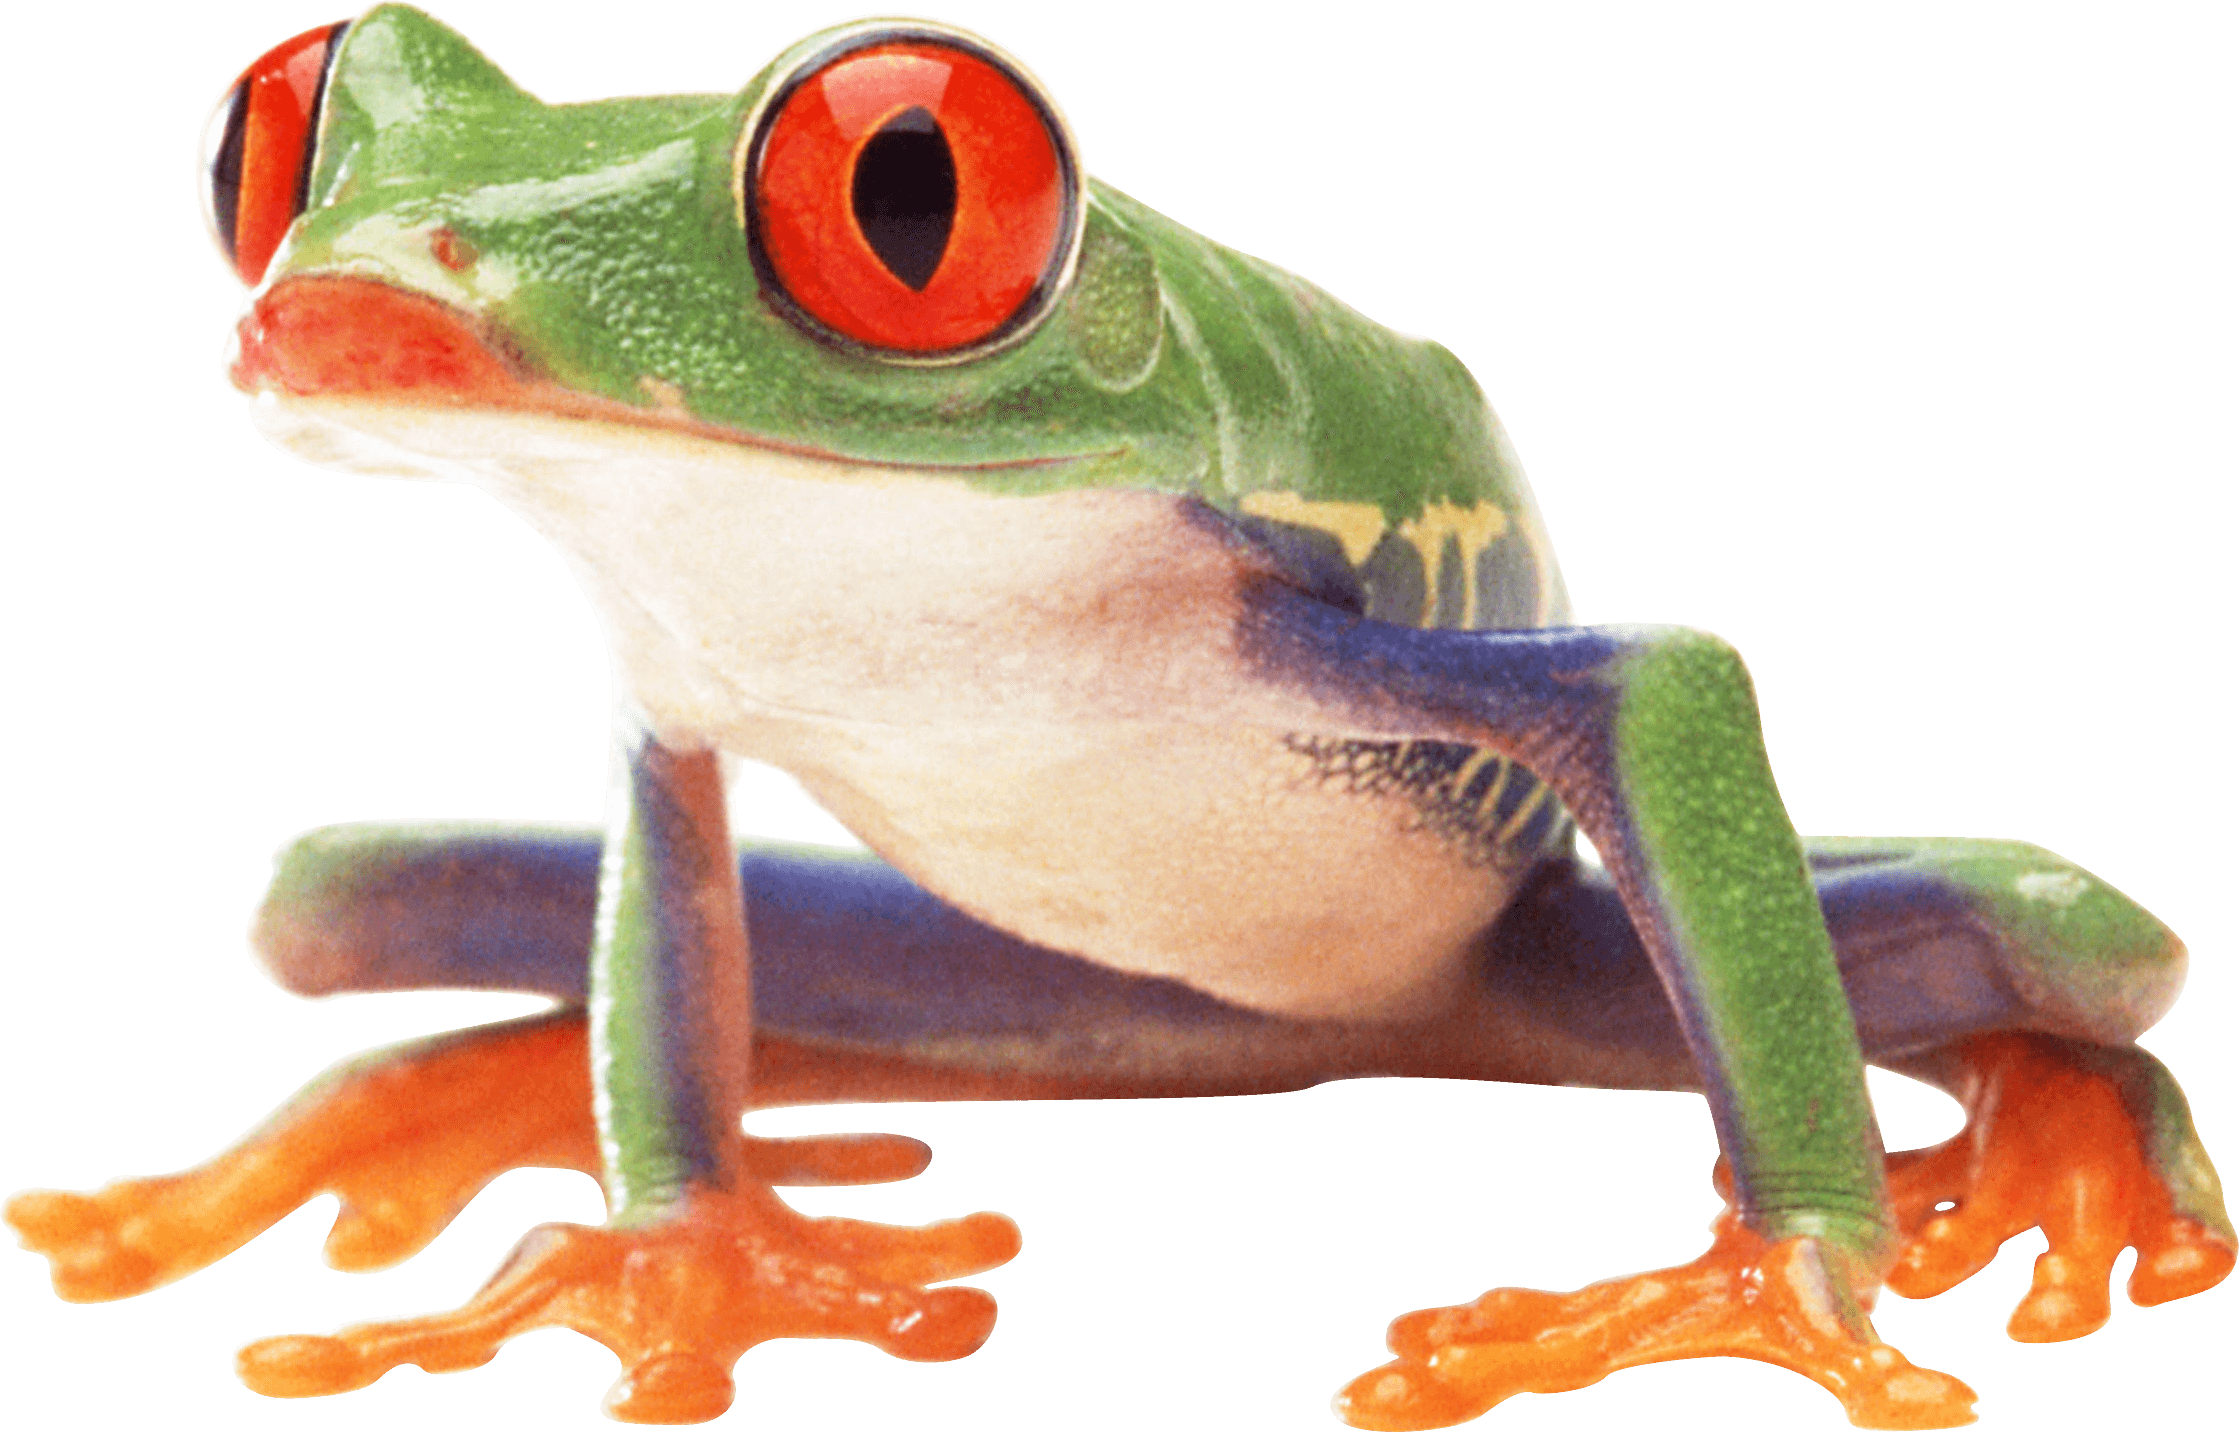 Png Hd Frog Transparent Hd Frogpng Images Pluspng